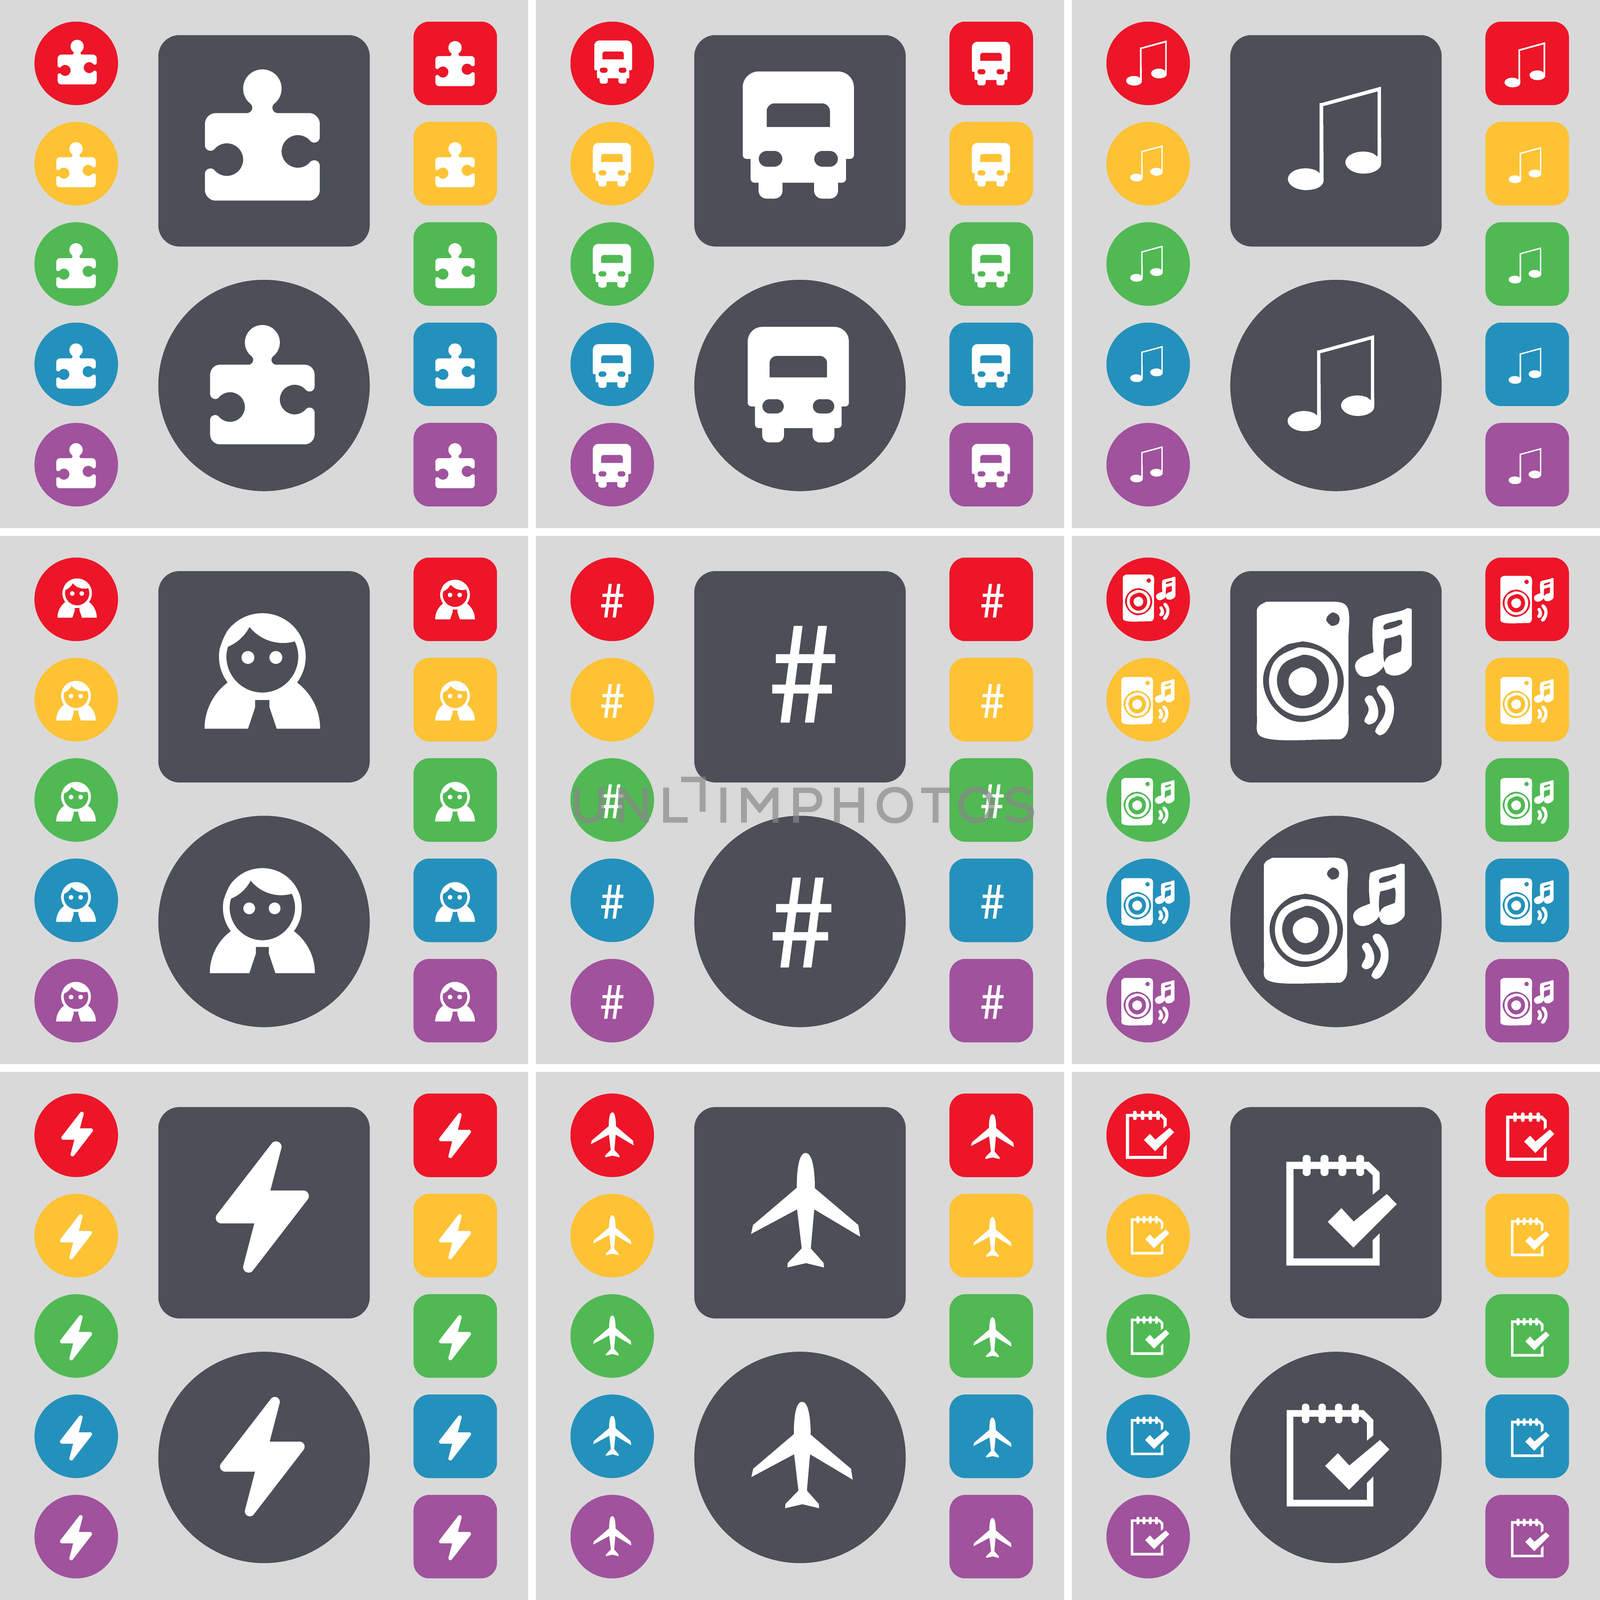 Puzzle, Truck, Note, Avatar, Hashtag, Speaker, Flash, Airplane, icon symbol. A large set of flat, colored buttons for your design.  by serhii_lohvyniuk